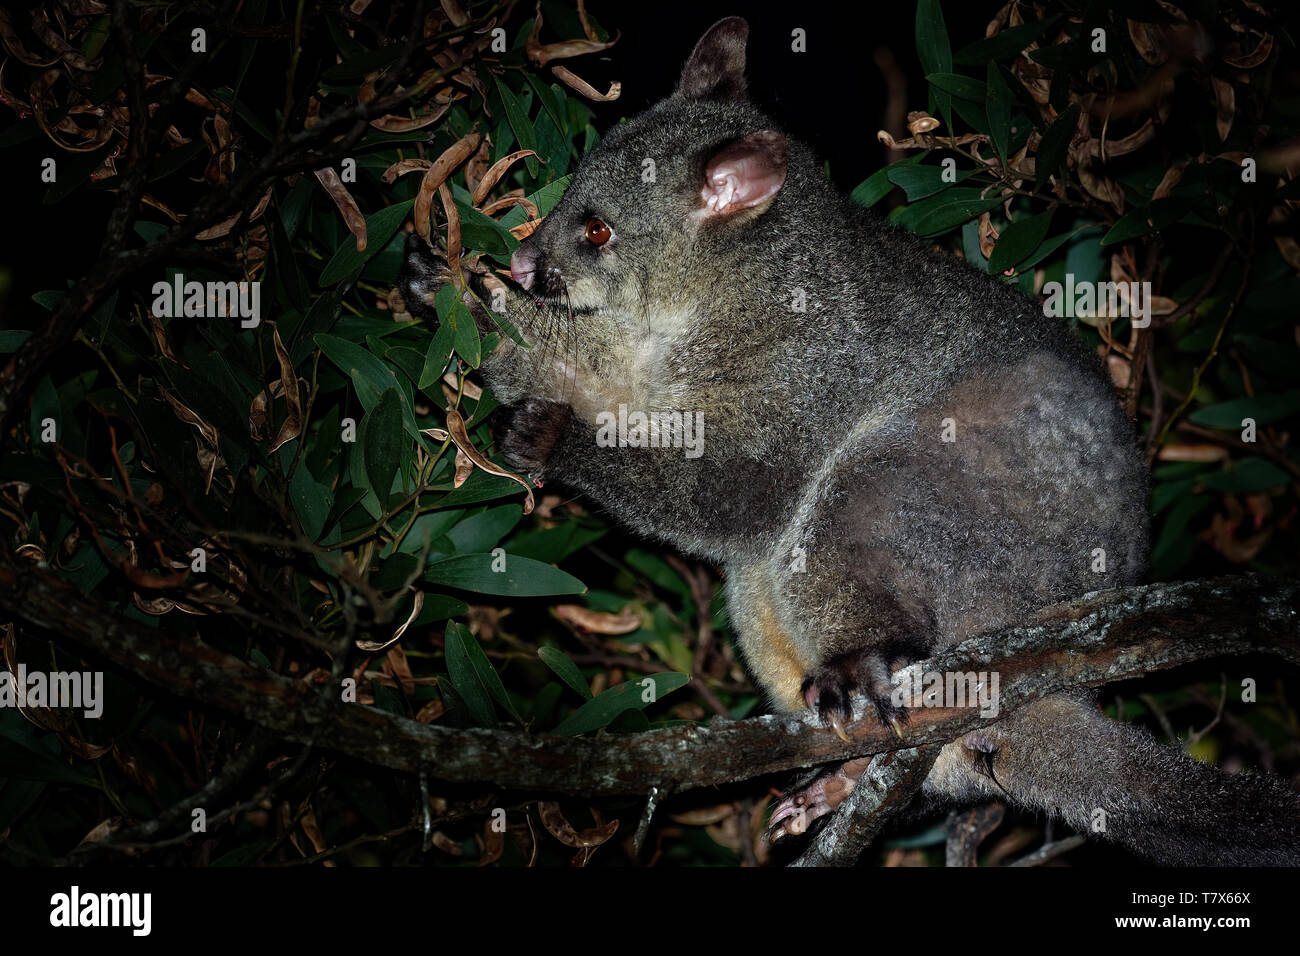 Common Brush-tailed Possum - Trichosurus vulpecula is nocturnal marsupial living in Australia and introducted to New Zealand, eating eucalyptus leafs  Stock Photo